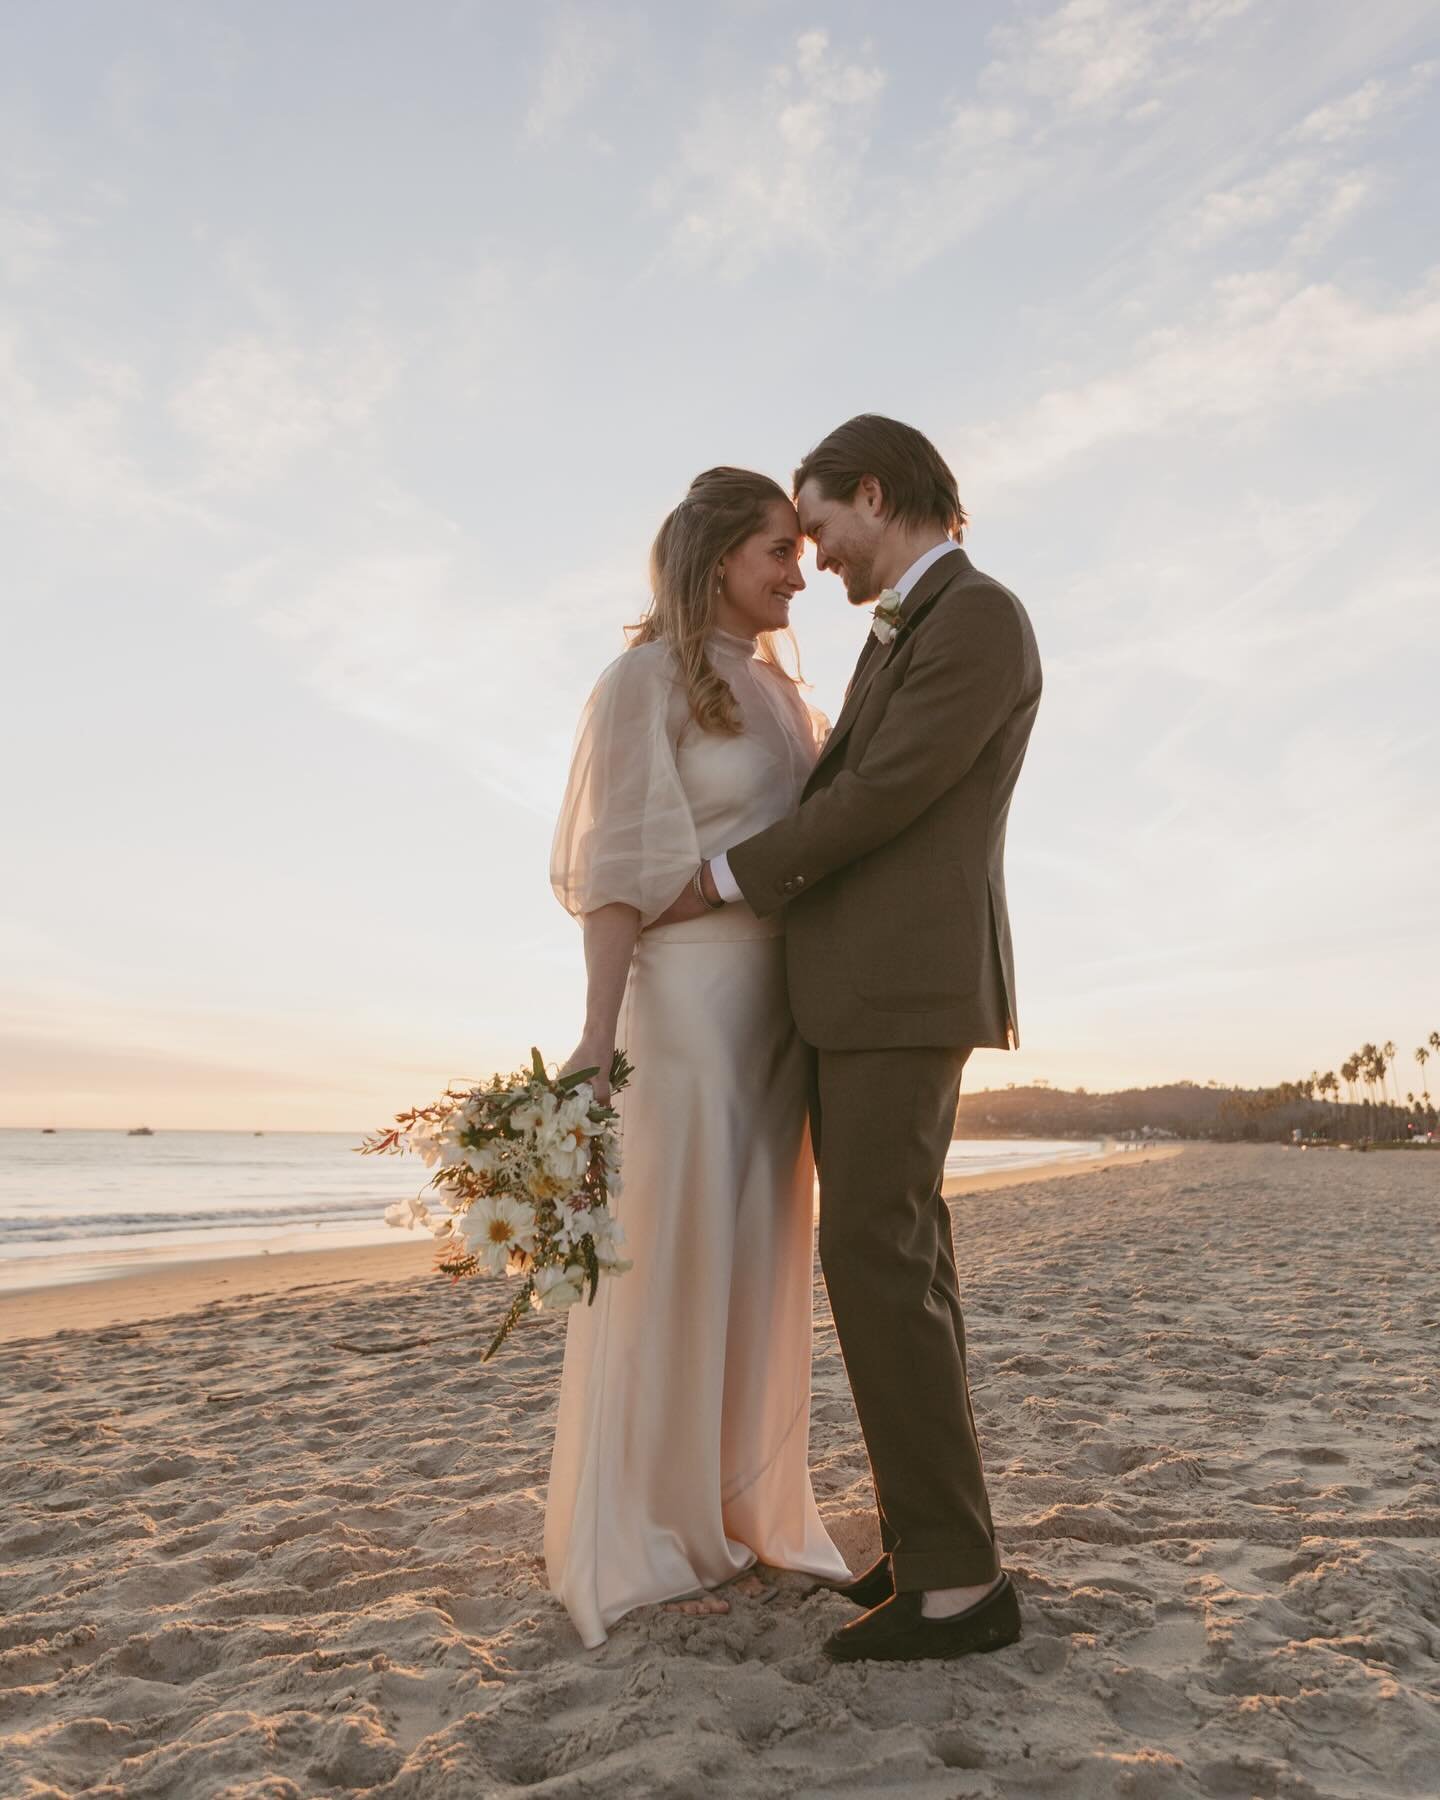 Heading back to the beach this weekend for B + D&rsquo;s wedding has us reminiscing on the sweetest sunset session 

Photography @michellelanning_photo 
Florals @ellaandlouieflowers 
Catering @barbareno_sb @satellitesb 
Drinks @satellitesb 
Tunes @va